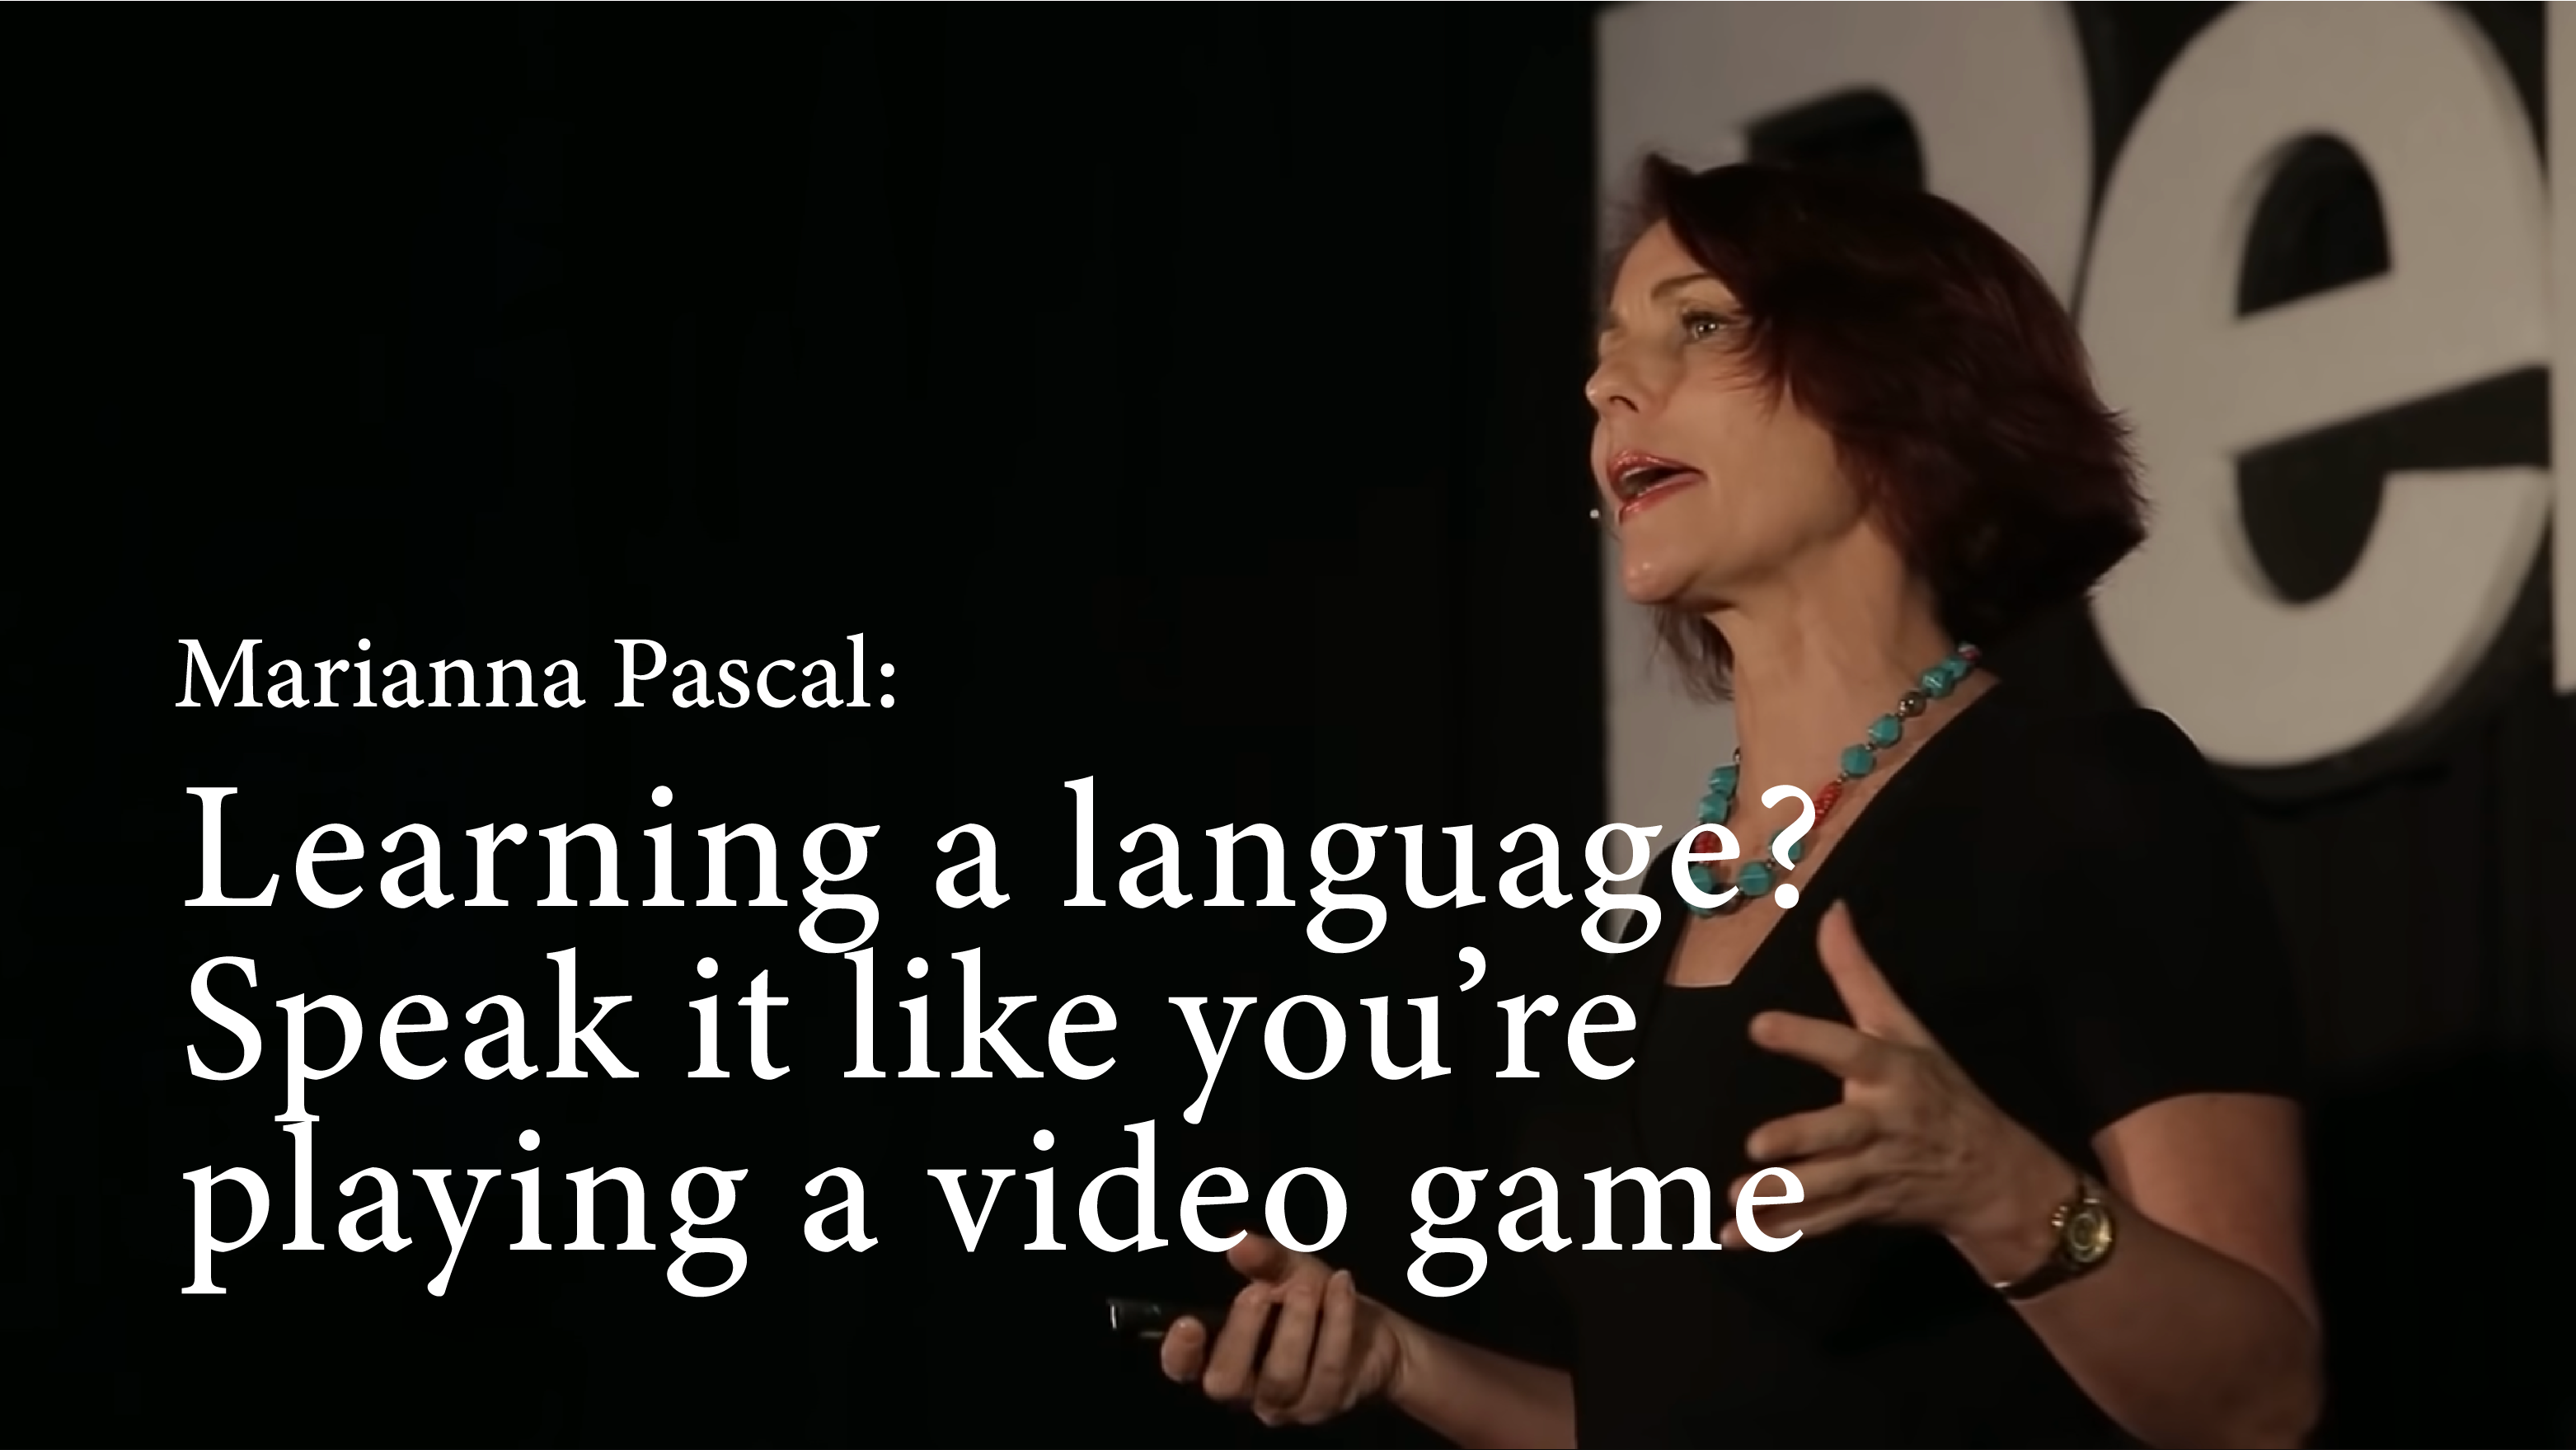 [C+] Learning a Language? Speak it Like You’re Playing a Video Game [FULL]